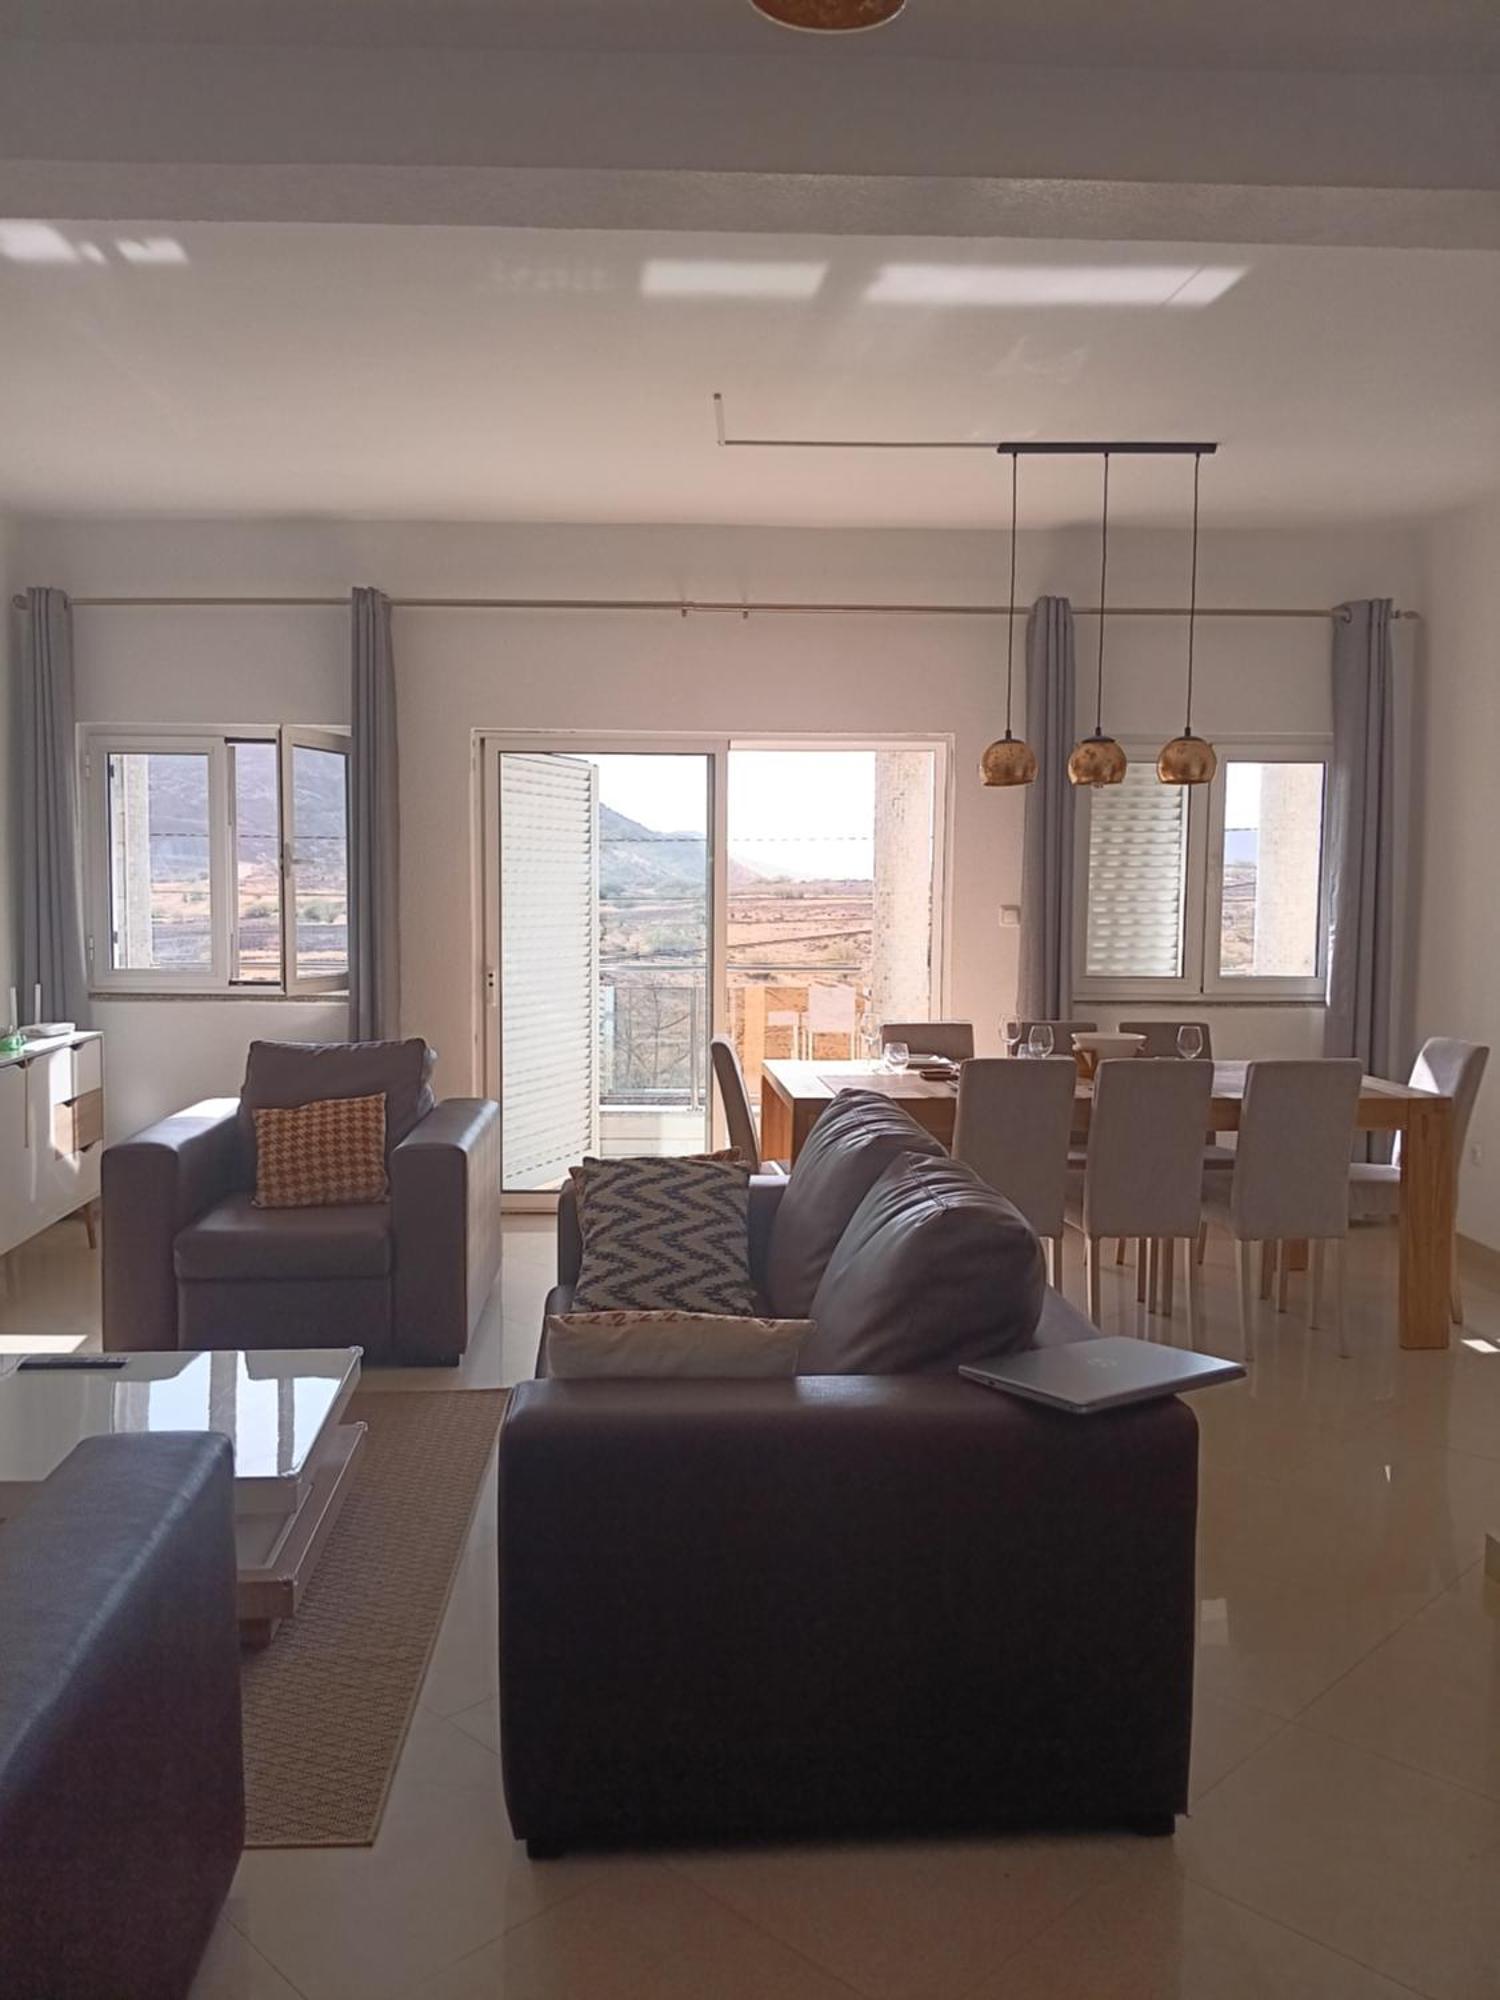 Cosy 3 Bedroom Apartment Calm And Landscape View 普拉亚 外观 照片